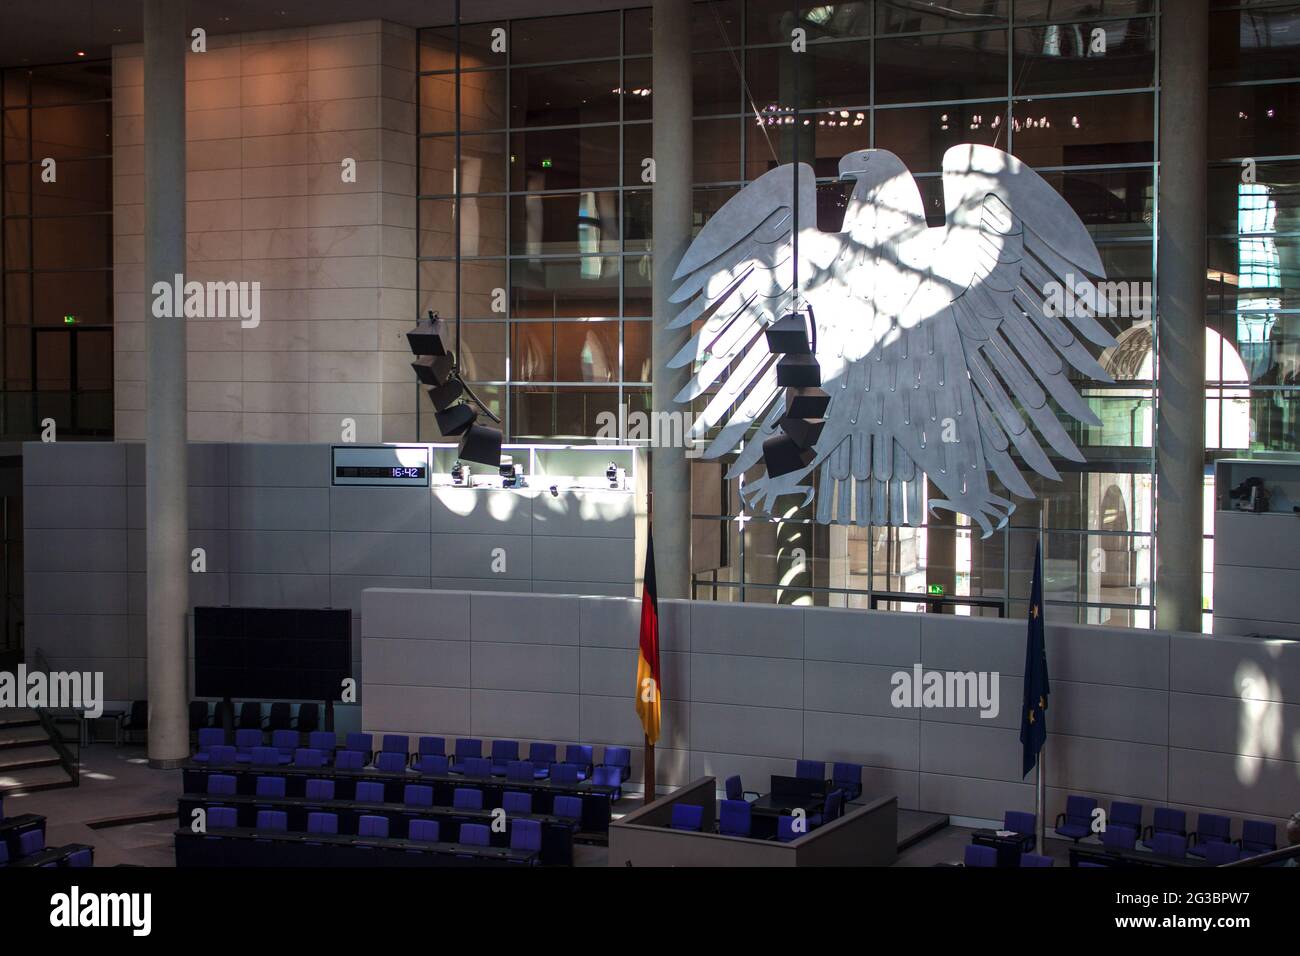 BERLIN, GERMANY - JUNE 8: Interior of Reichstag (German parliament) on June 8, 2013 in Berlin, Germany. After moving of Bundestag in 1999 building of Stock Photo